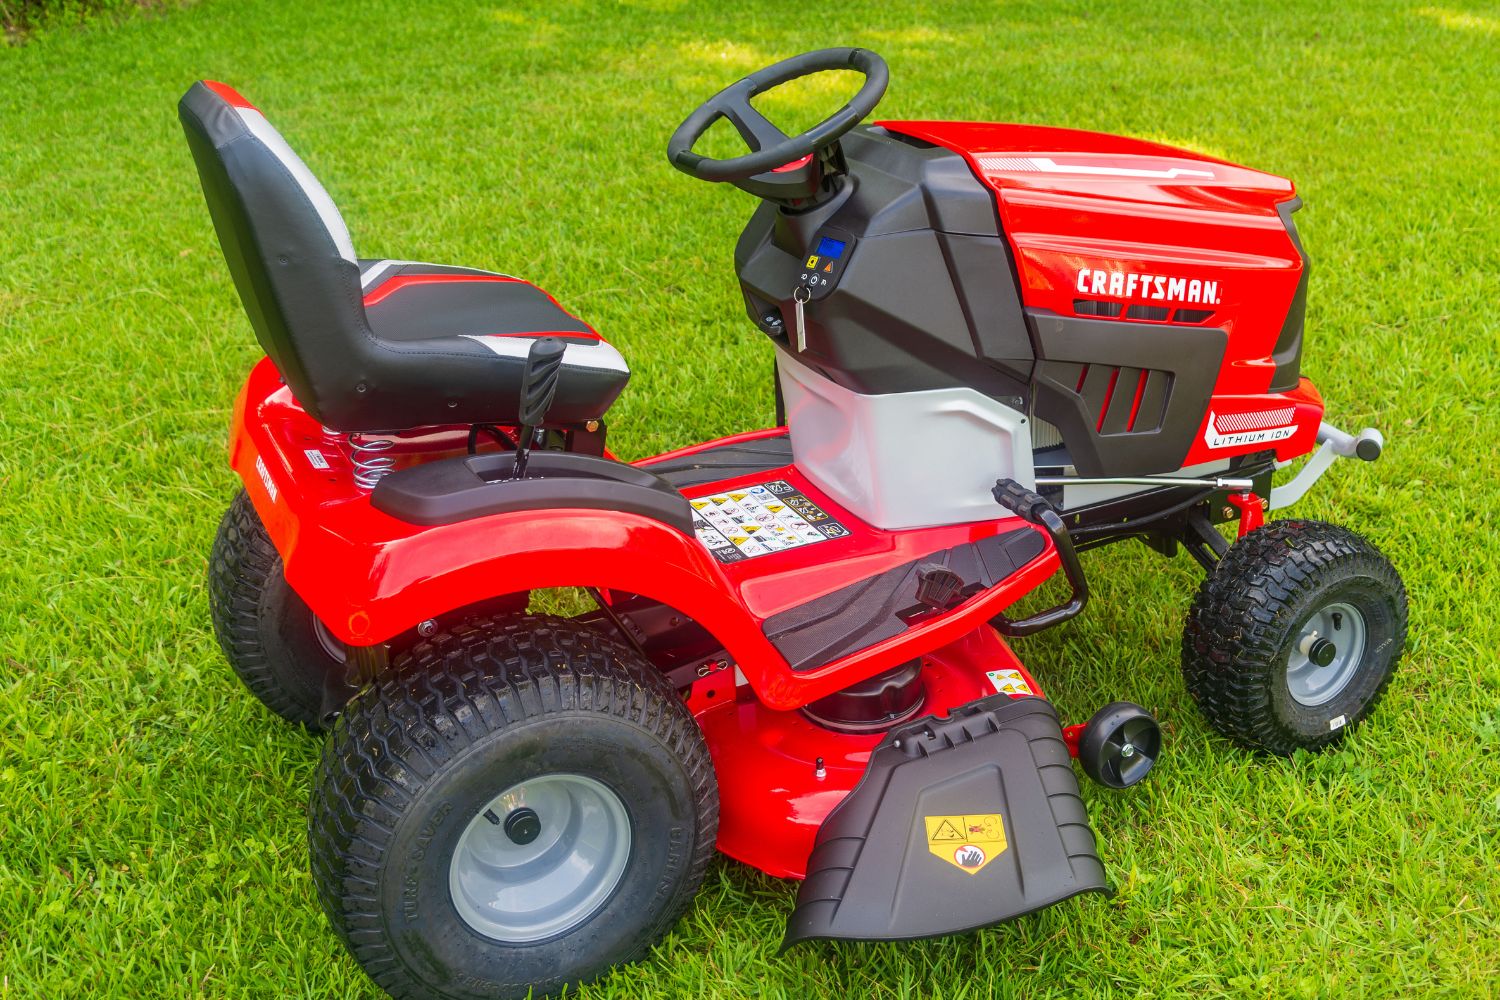 The Craftsman battery riding mower parked on a freshly mowed lawn